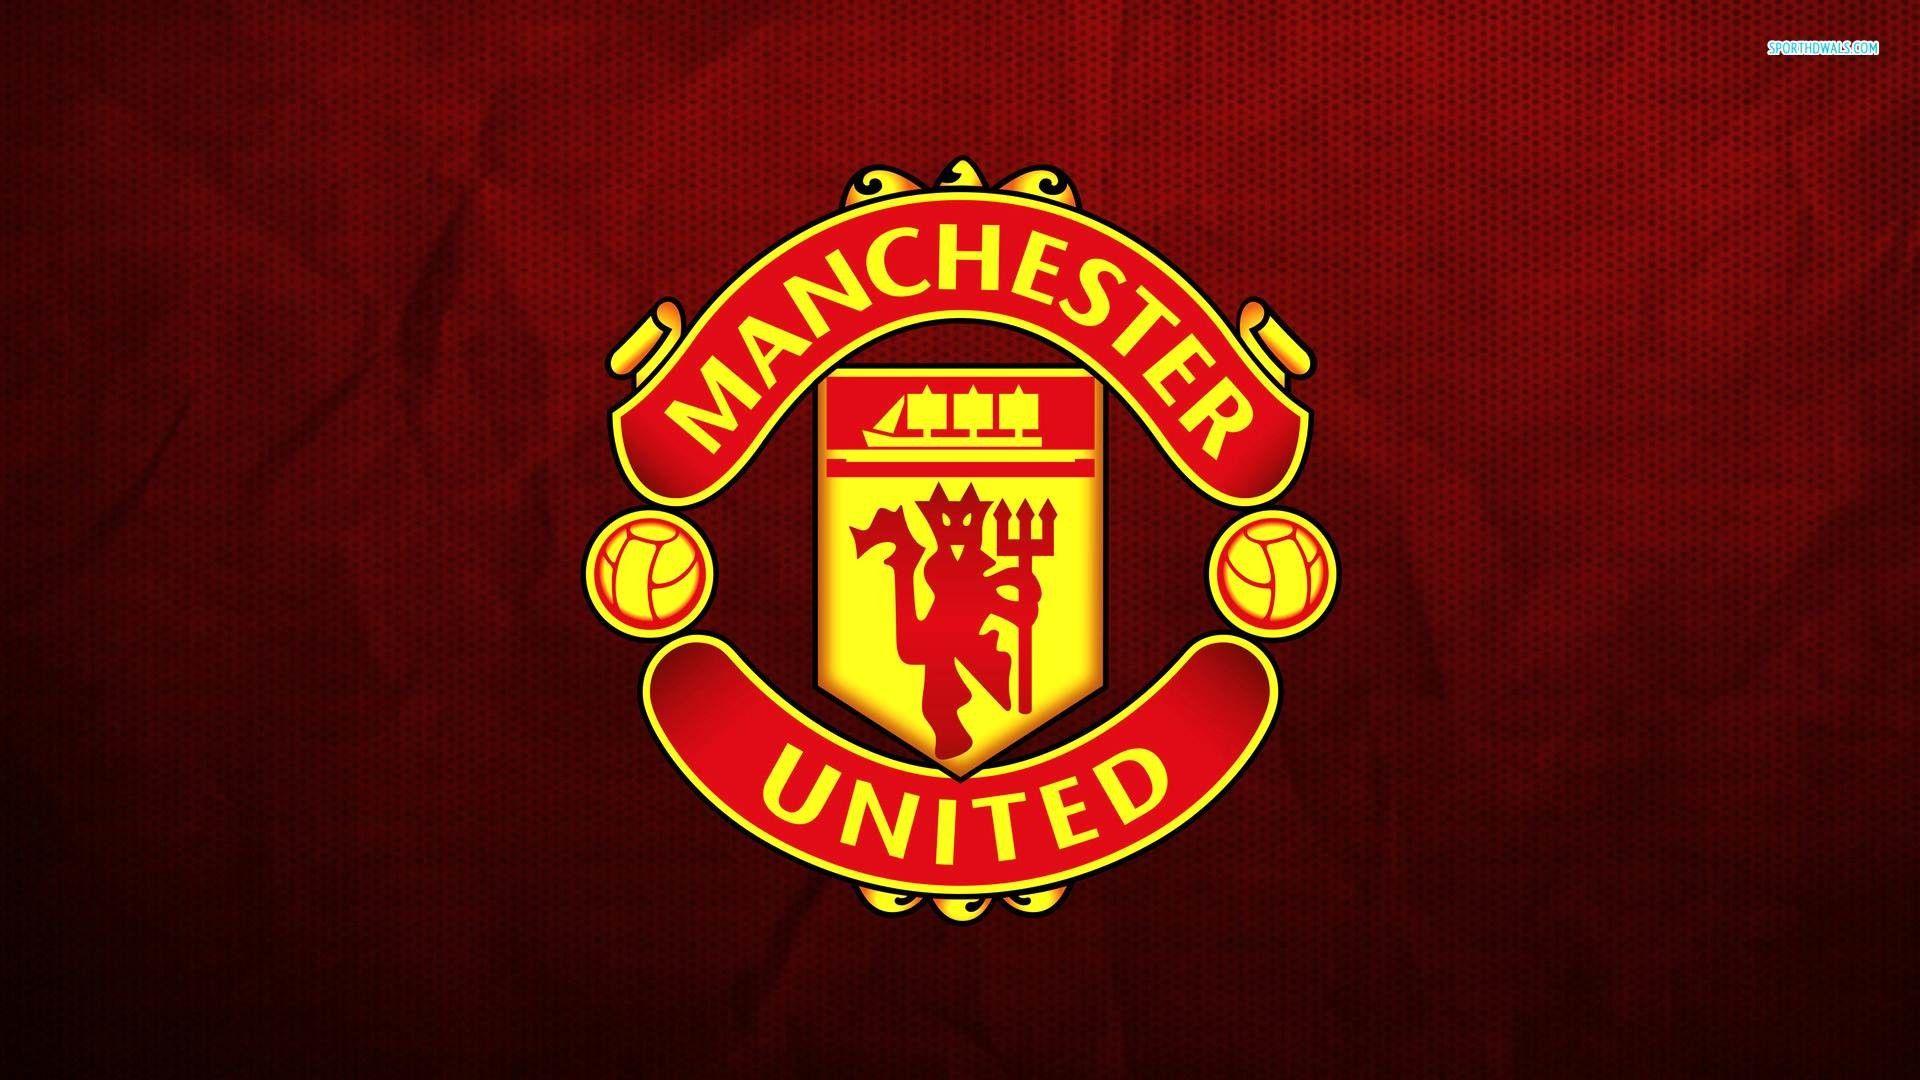 Manchester United Logo Wallpapers HD 2017 ·①